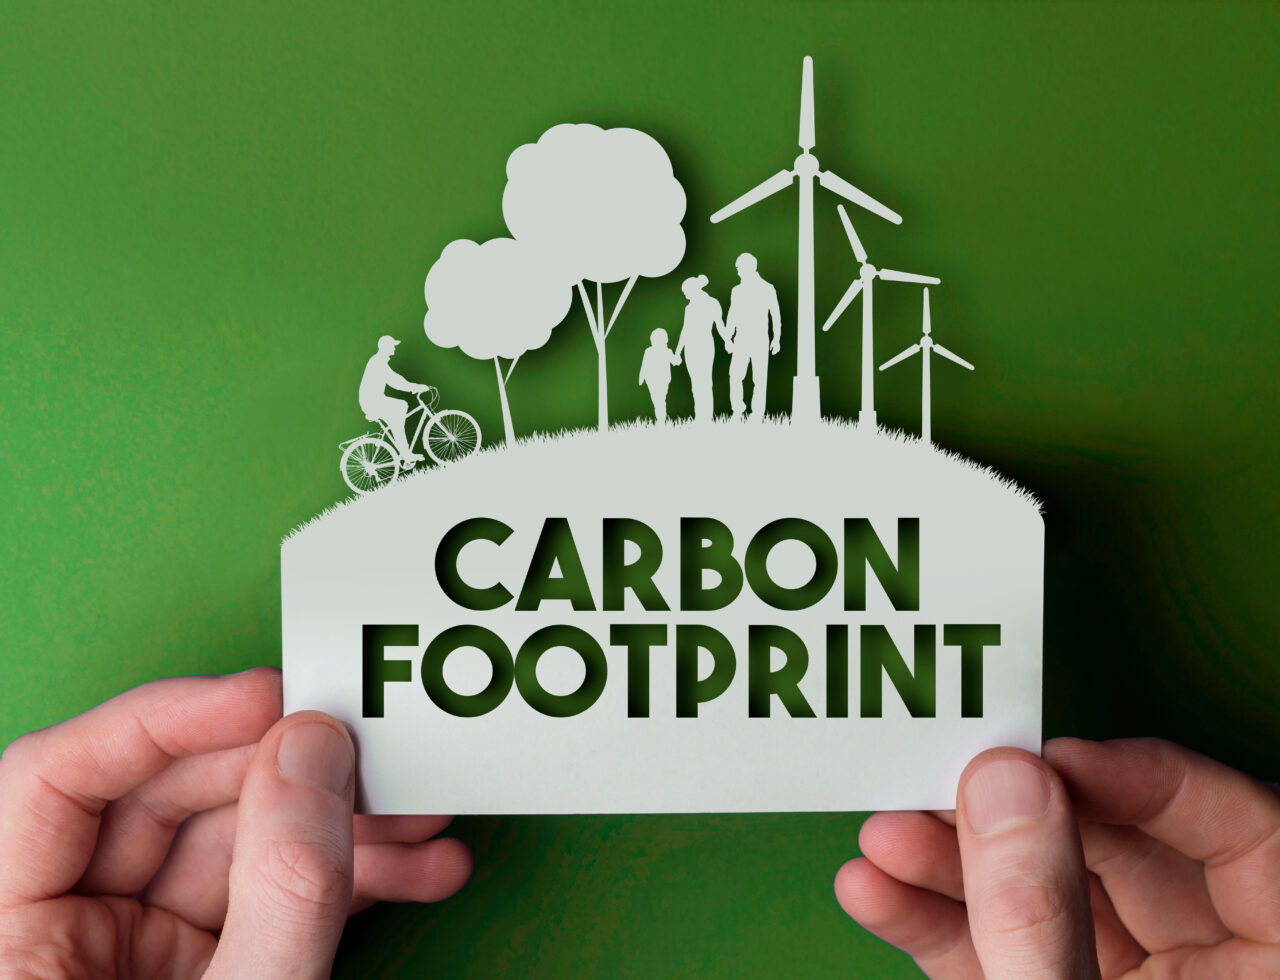 An image showing a person holding a carton on which is written Carbon footprint. 